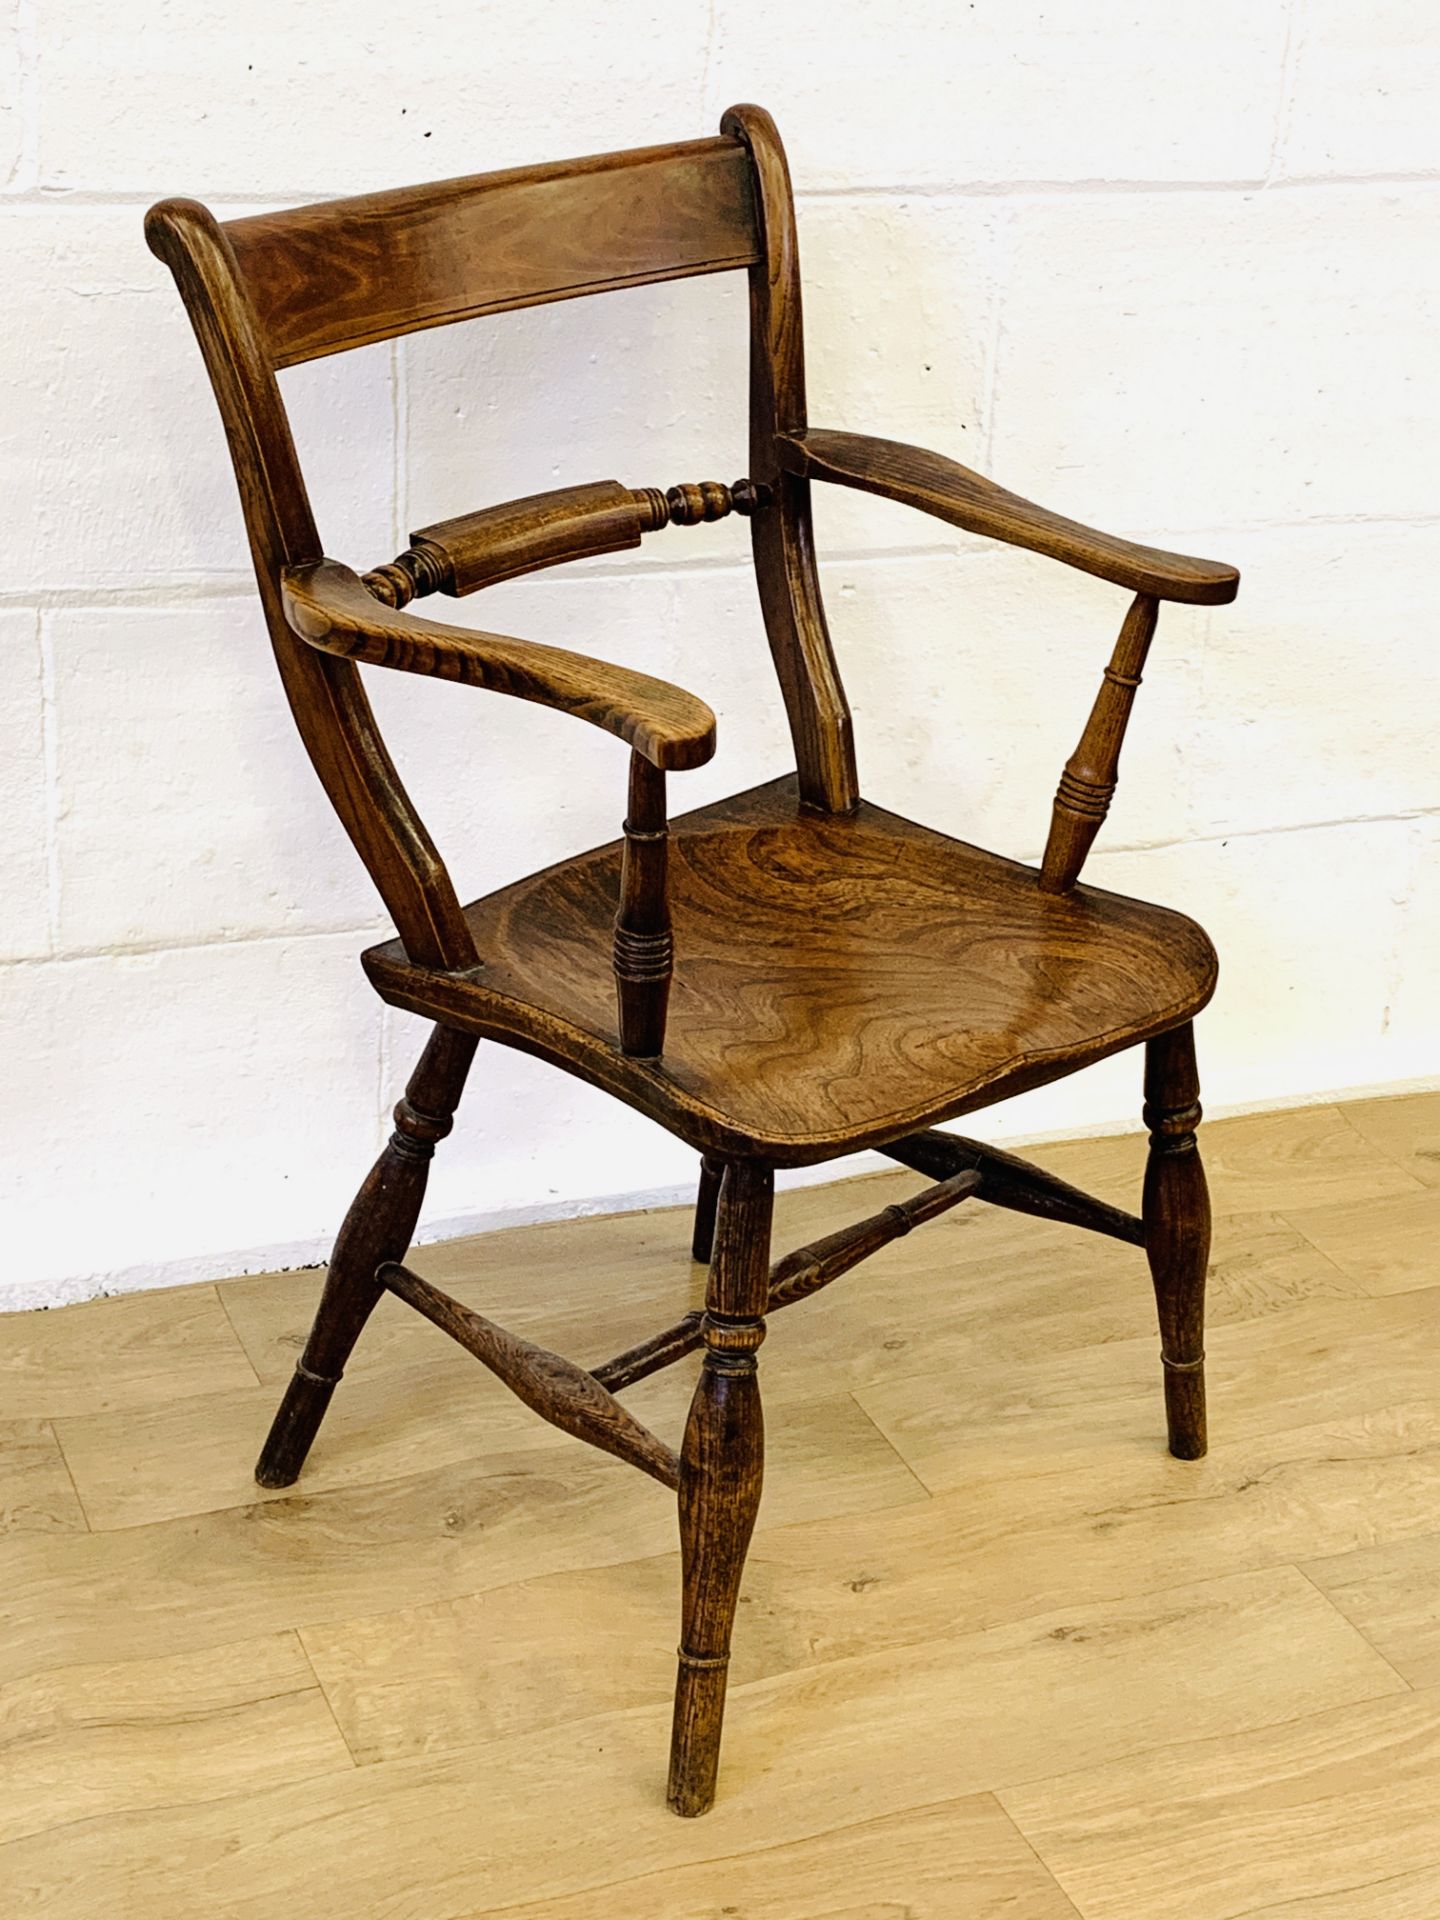 Open elbow chair with elm seat - Image 2 of 3